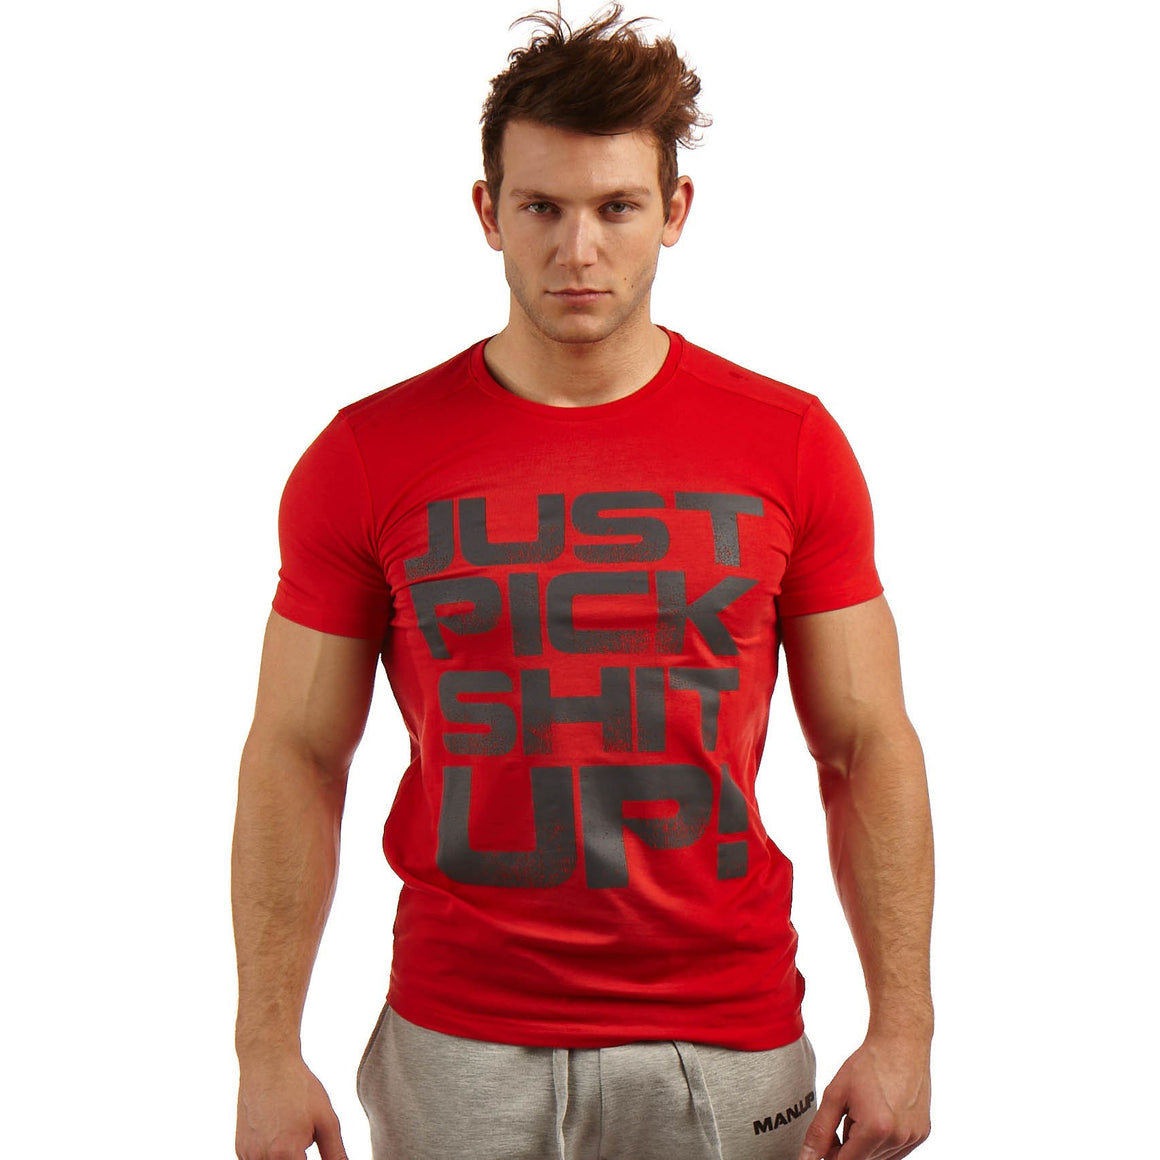 Man Up Red T-Shirt - Just Pick Shit Up